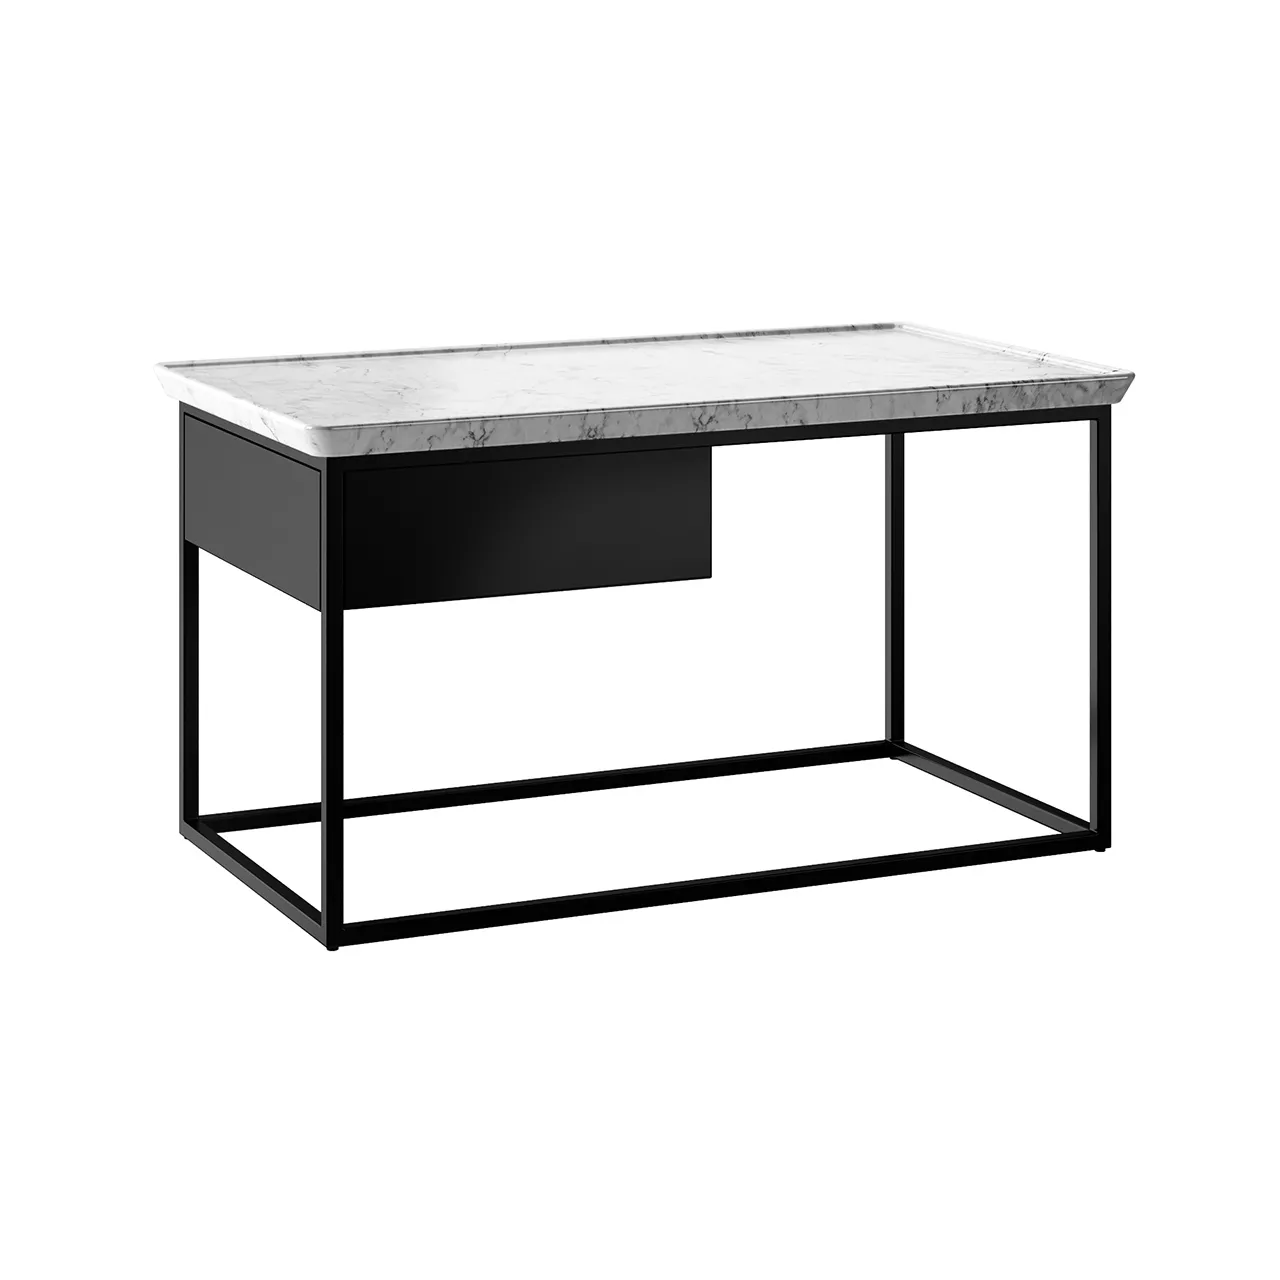 Furniture – 934-coffee-table-with-storage-space-by-rolf-benz